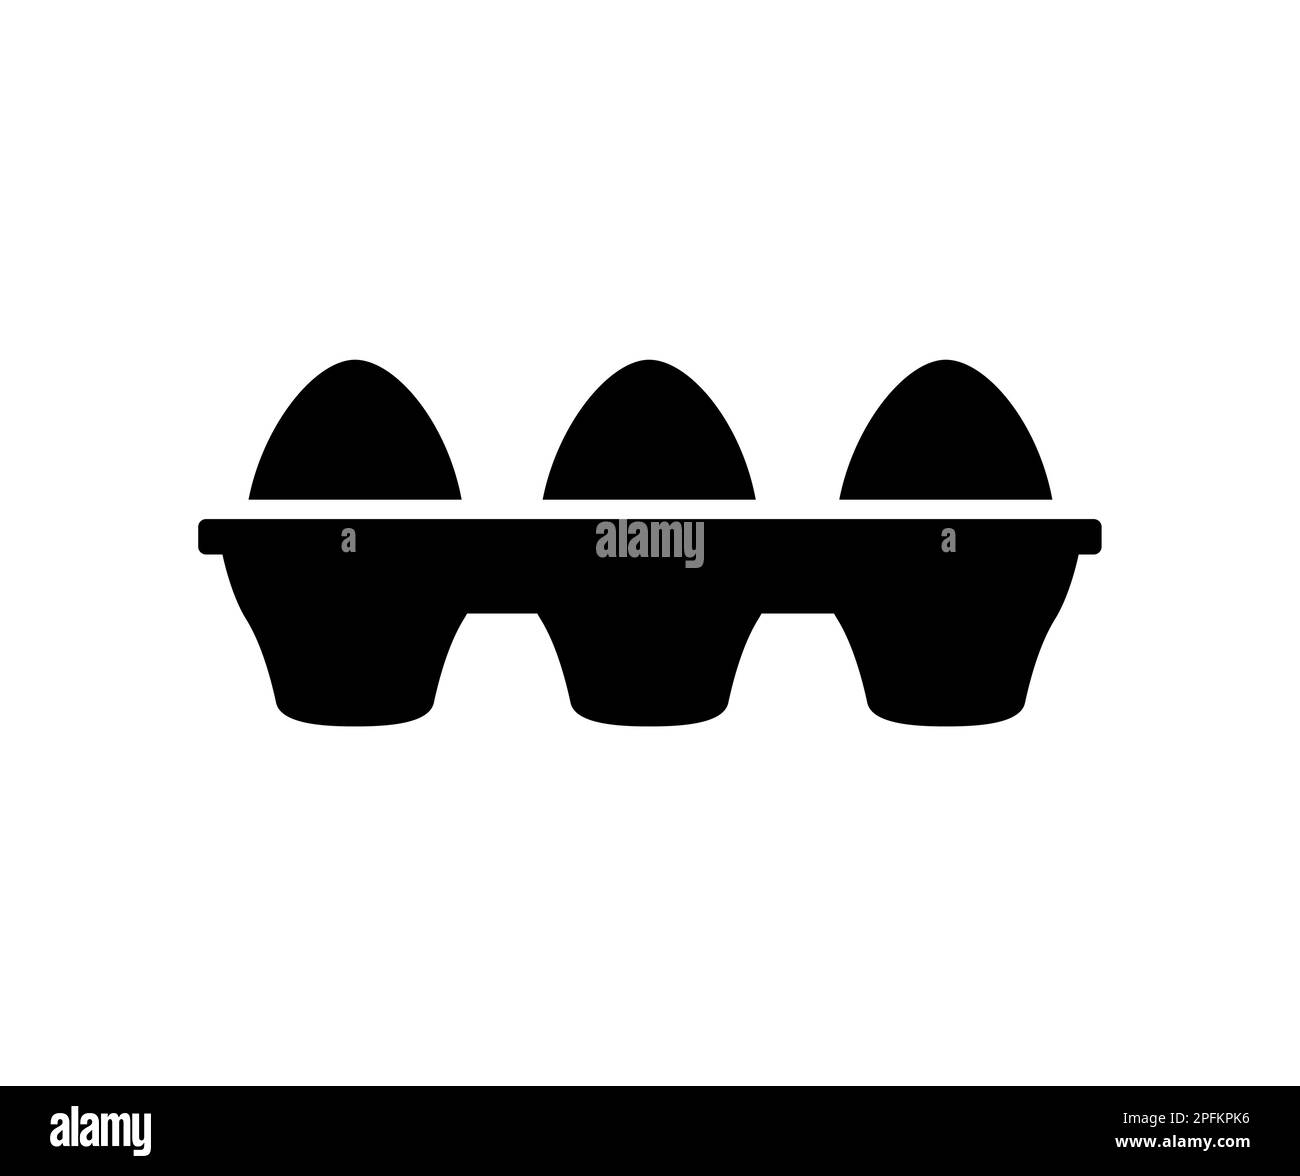 Vector egg carton pack. Eggs container box cooking food cardboard black icon. Stock Vector